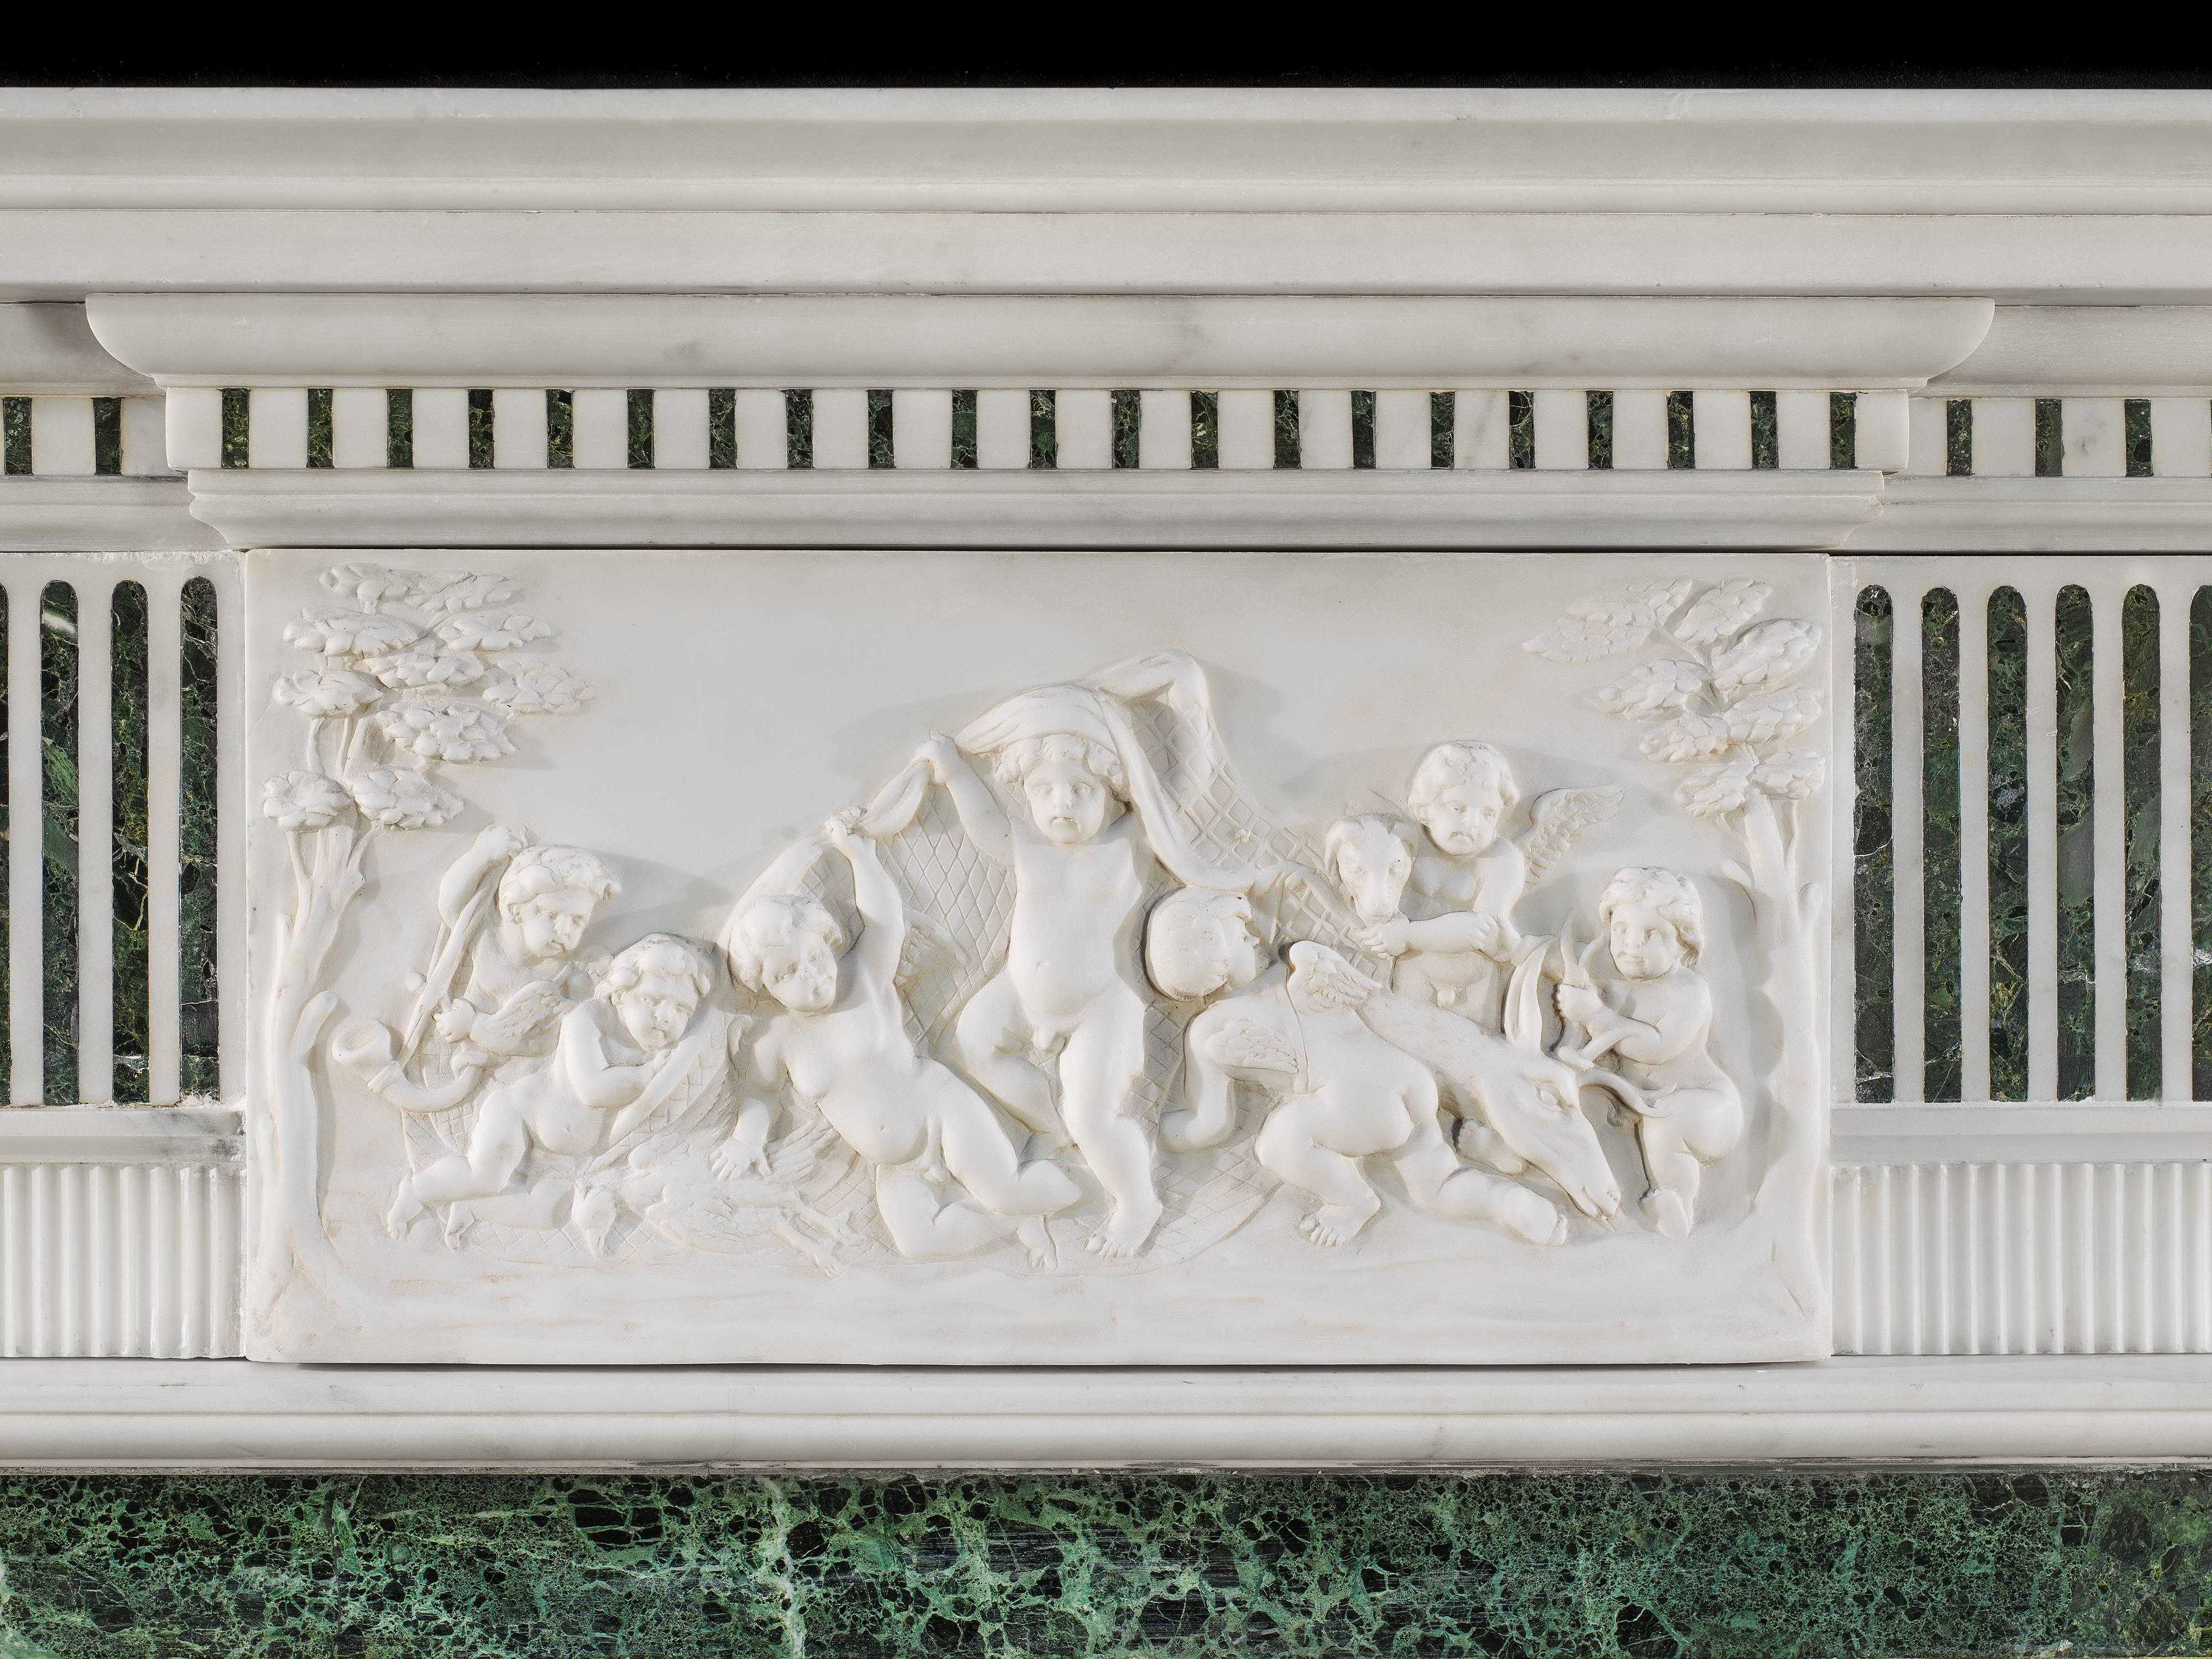 Georgian  Early 20th Century Statuary and Inlaid Verde Antico Marble Fireplace Mantel